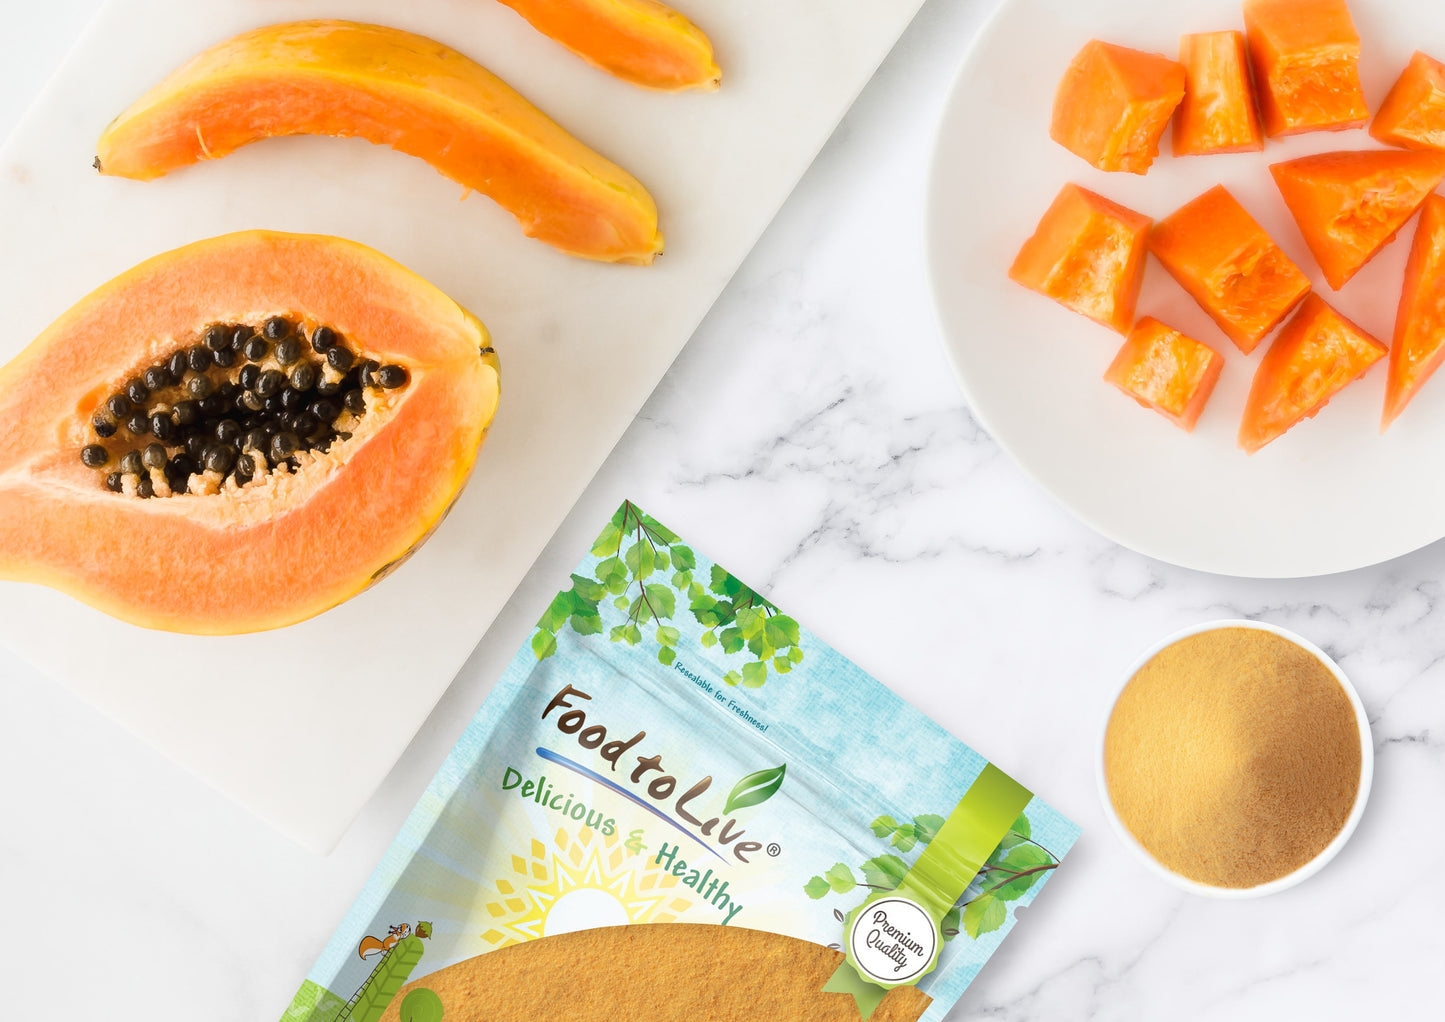 Papaya Powder - Made from Raw Dried Fruit, Unsulfured, Vegan, Bulk, Great for Baking, Juices, Smoothies, Yogurts, and Instant Breakfast Drinks, No Sulphites - by Food to Live